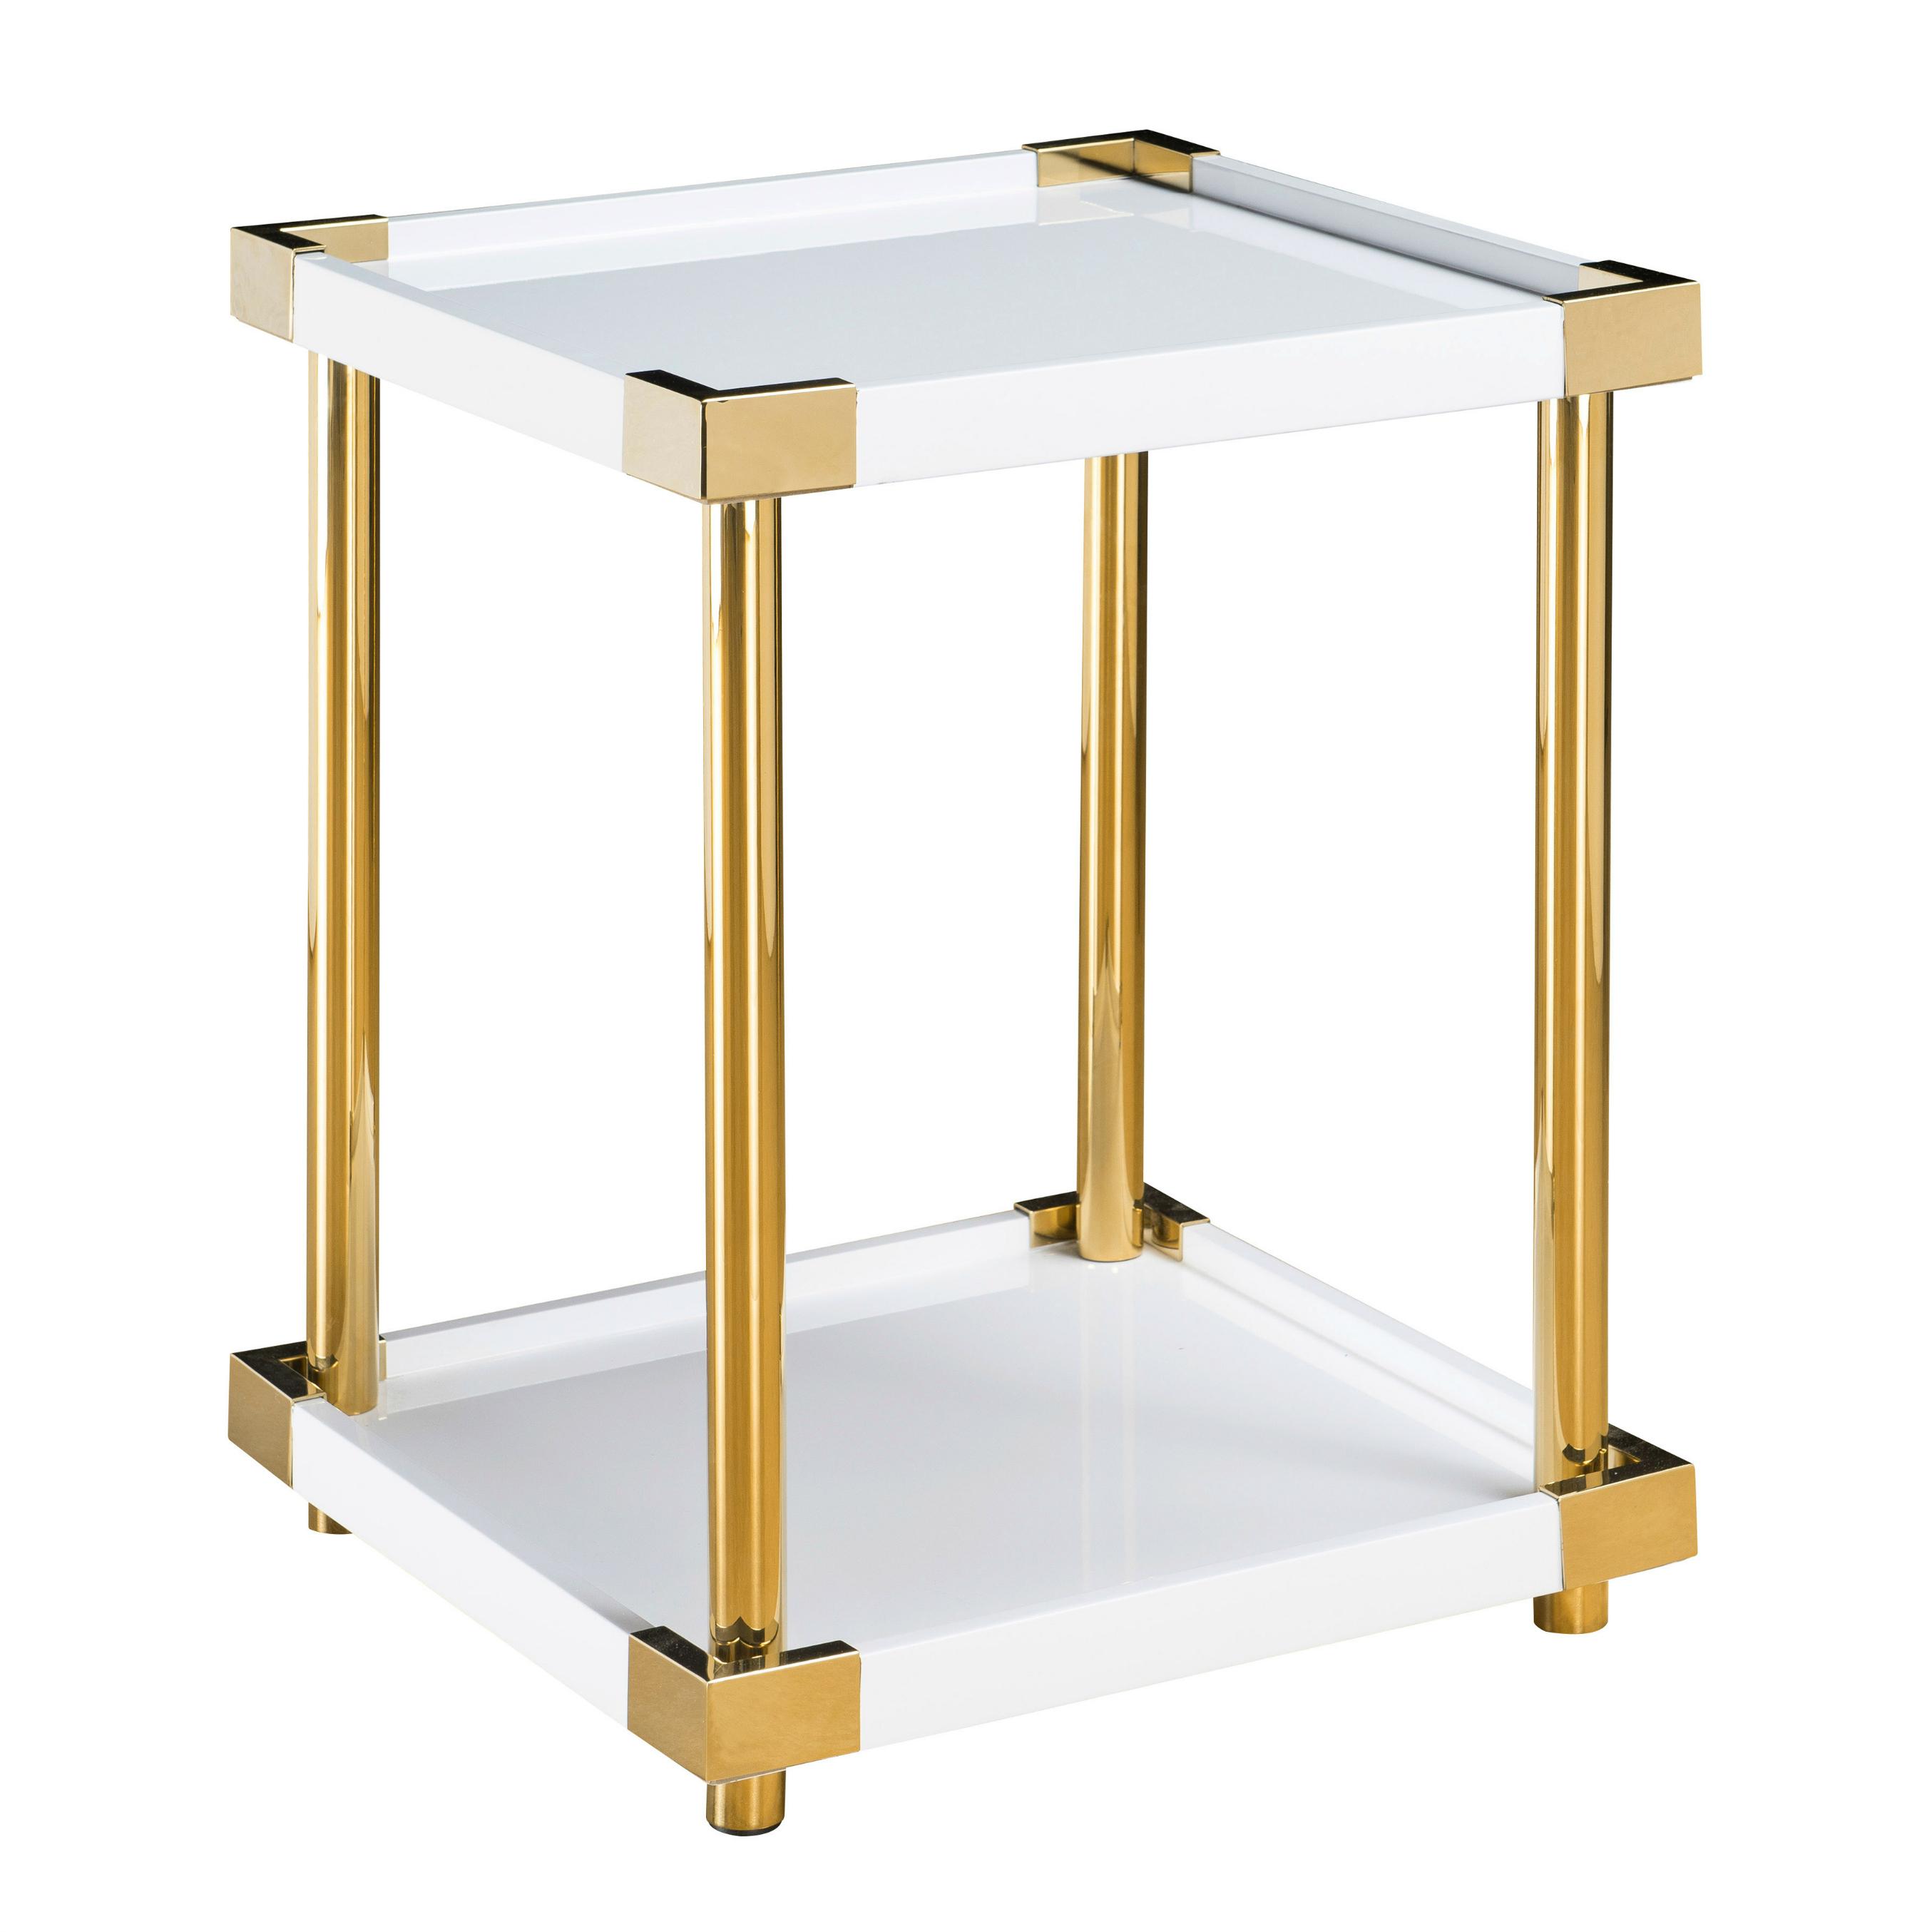 pulaski home comfort collection ariene square white accent table modern gold skinny console with storage black cube side threshold nightstand hampton bay patio beach themed room